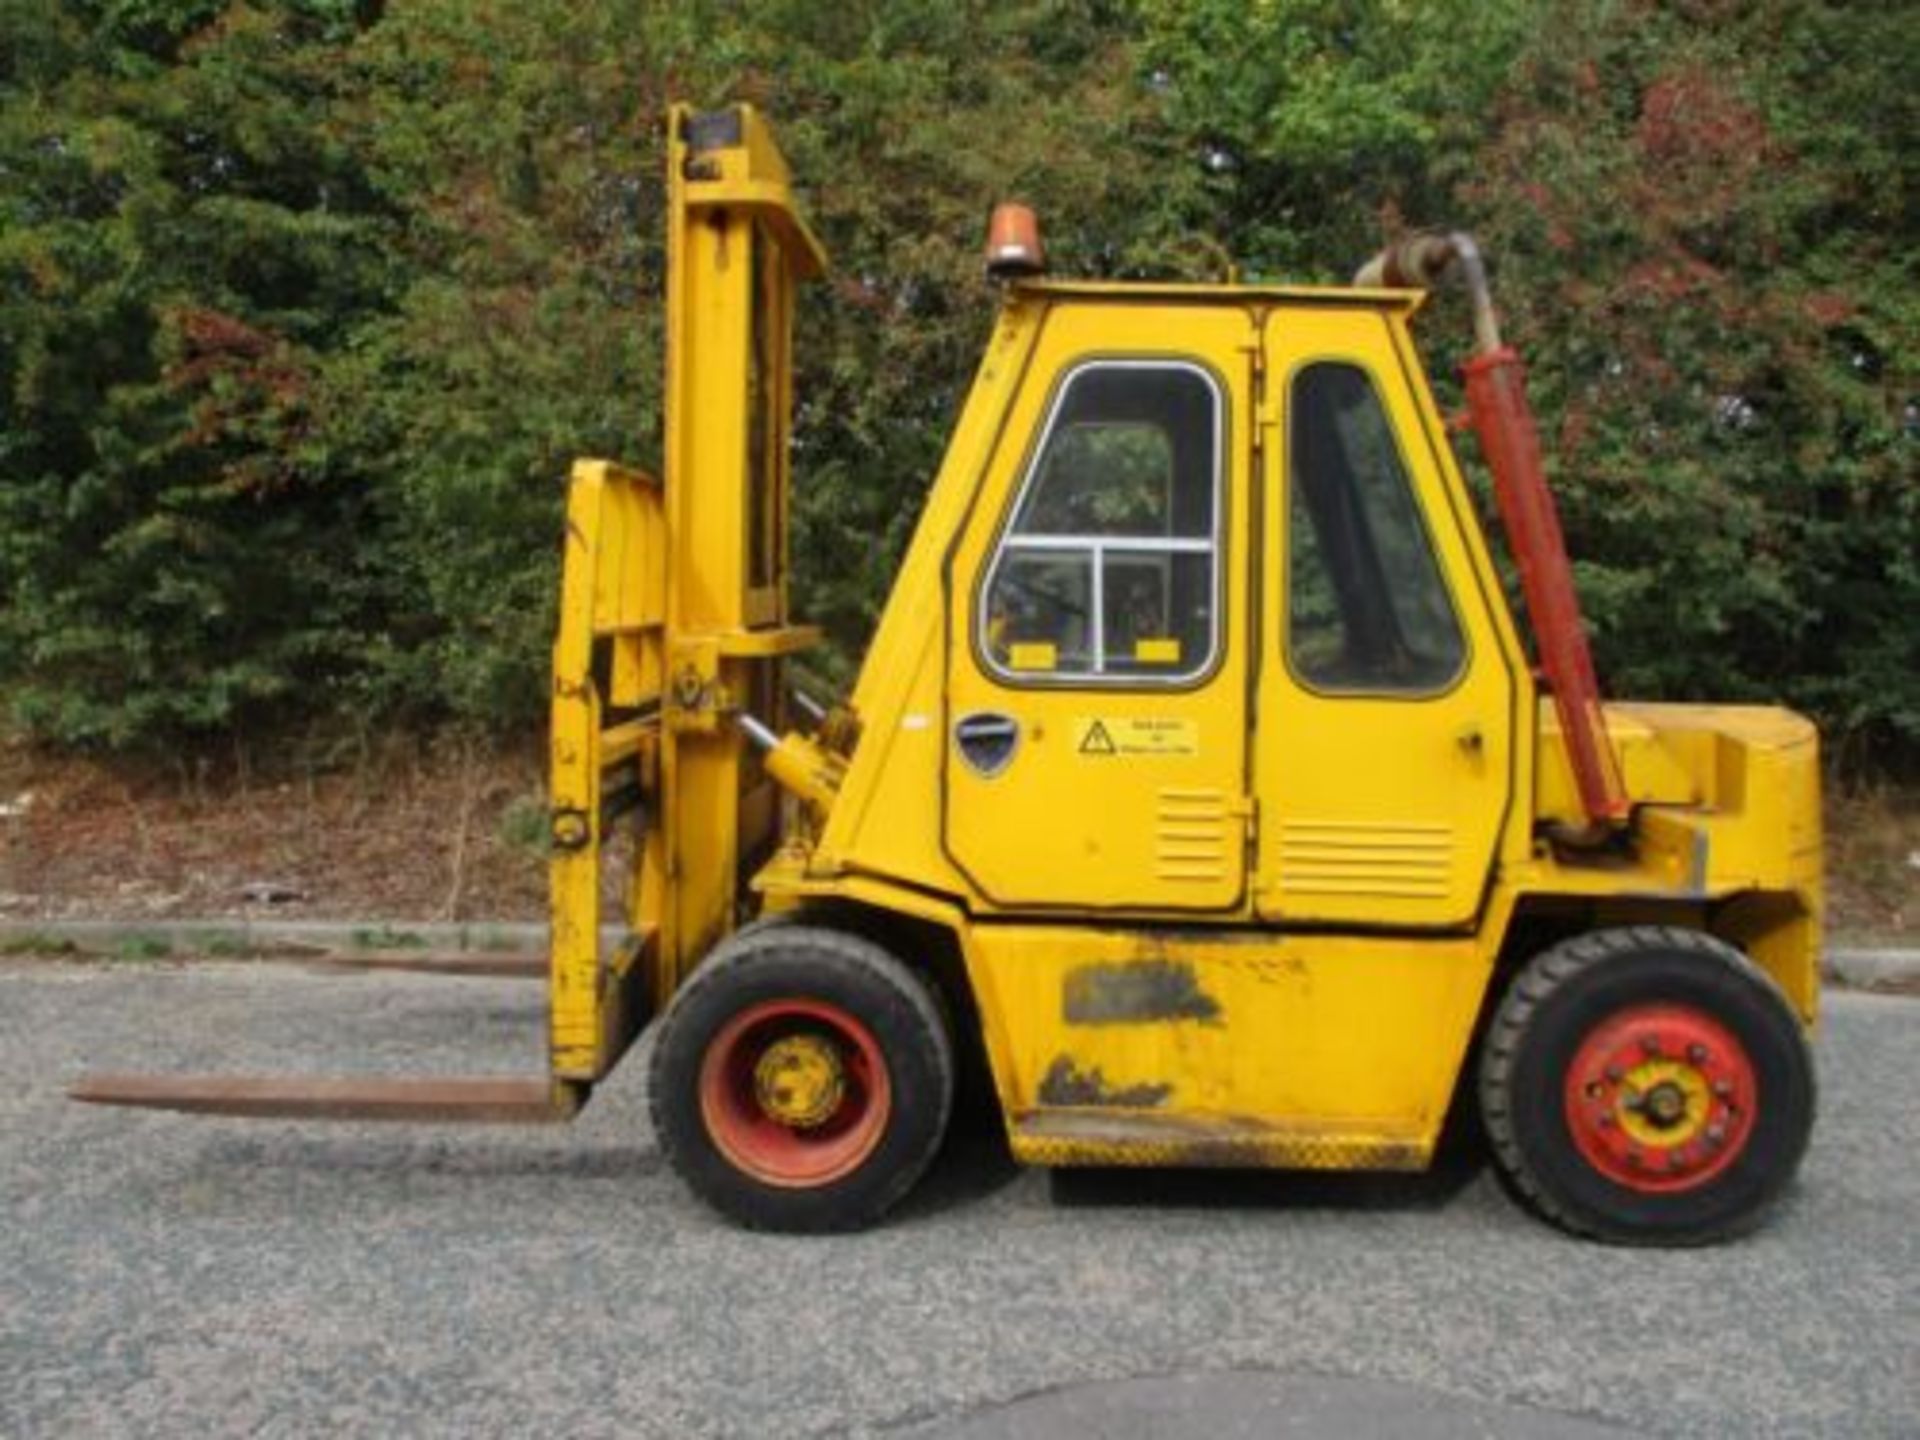 CLIMAX DA50 FORK LIFT FORKLIFT TRUCK STACKER 5 TON LIFT 6 7 8 10 DELIVERY - Image 11 of 12